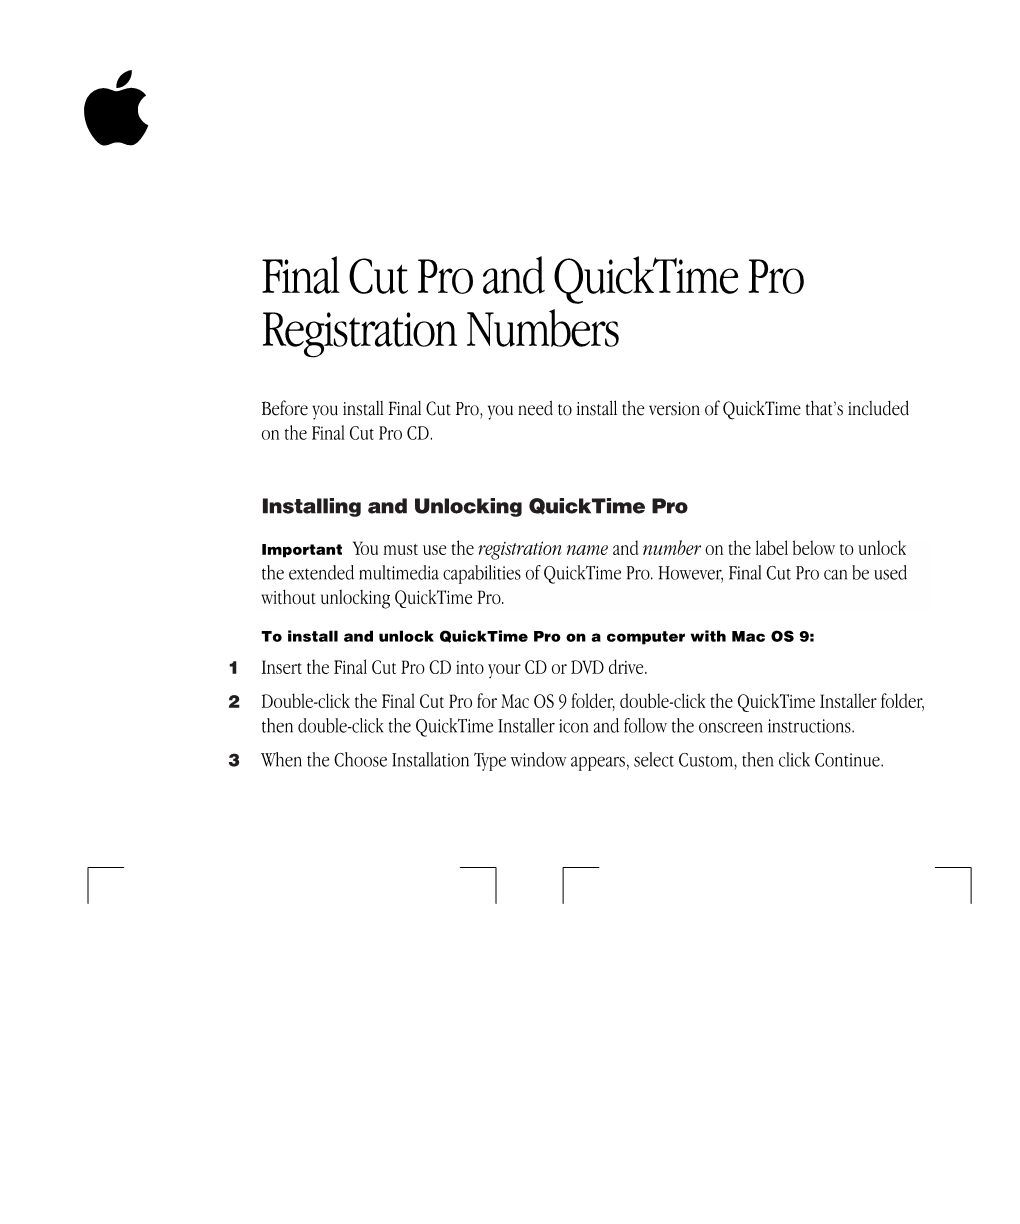 Final Cut Pro and Quicktime Prro Registration Numbers